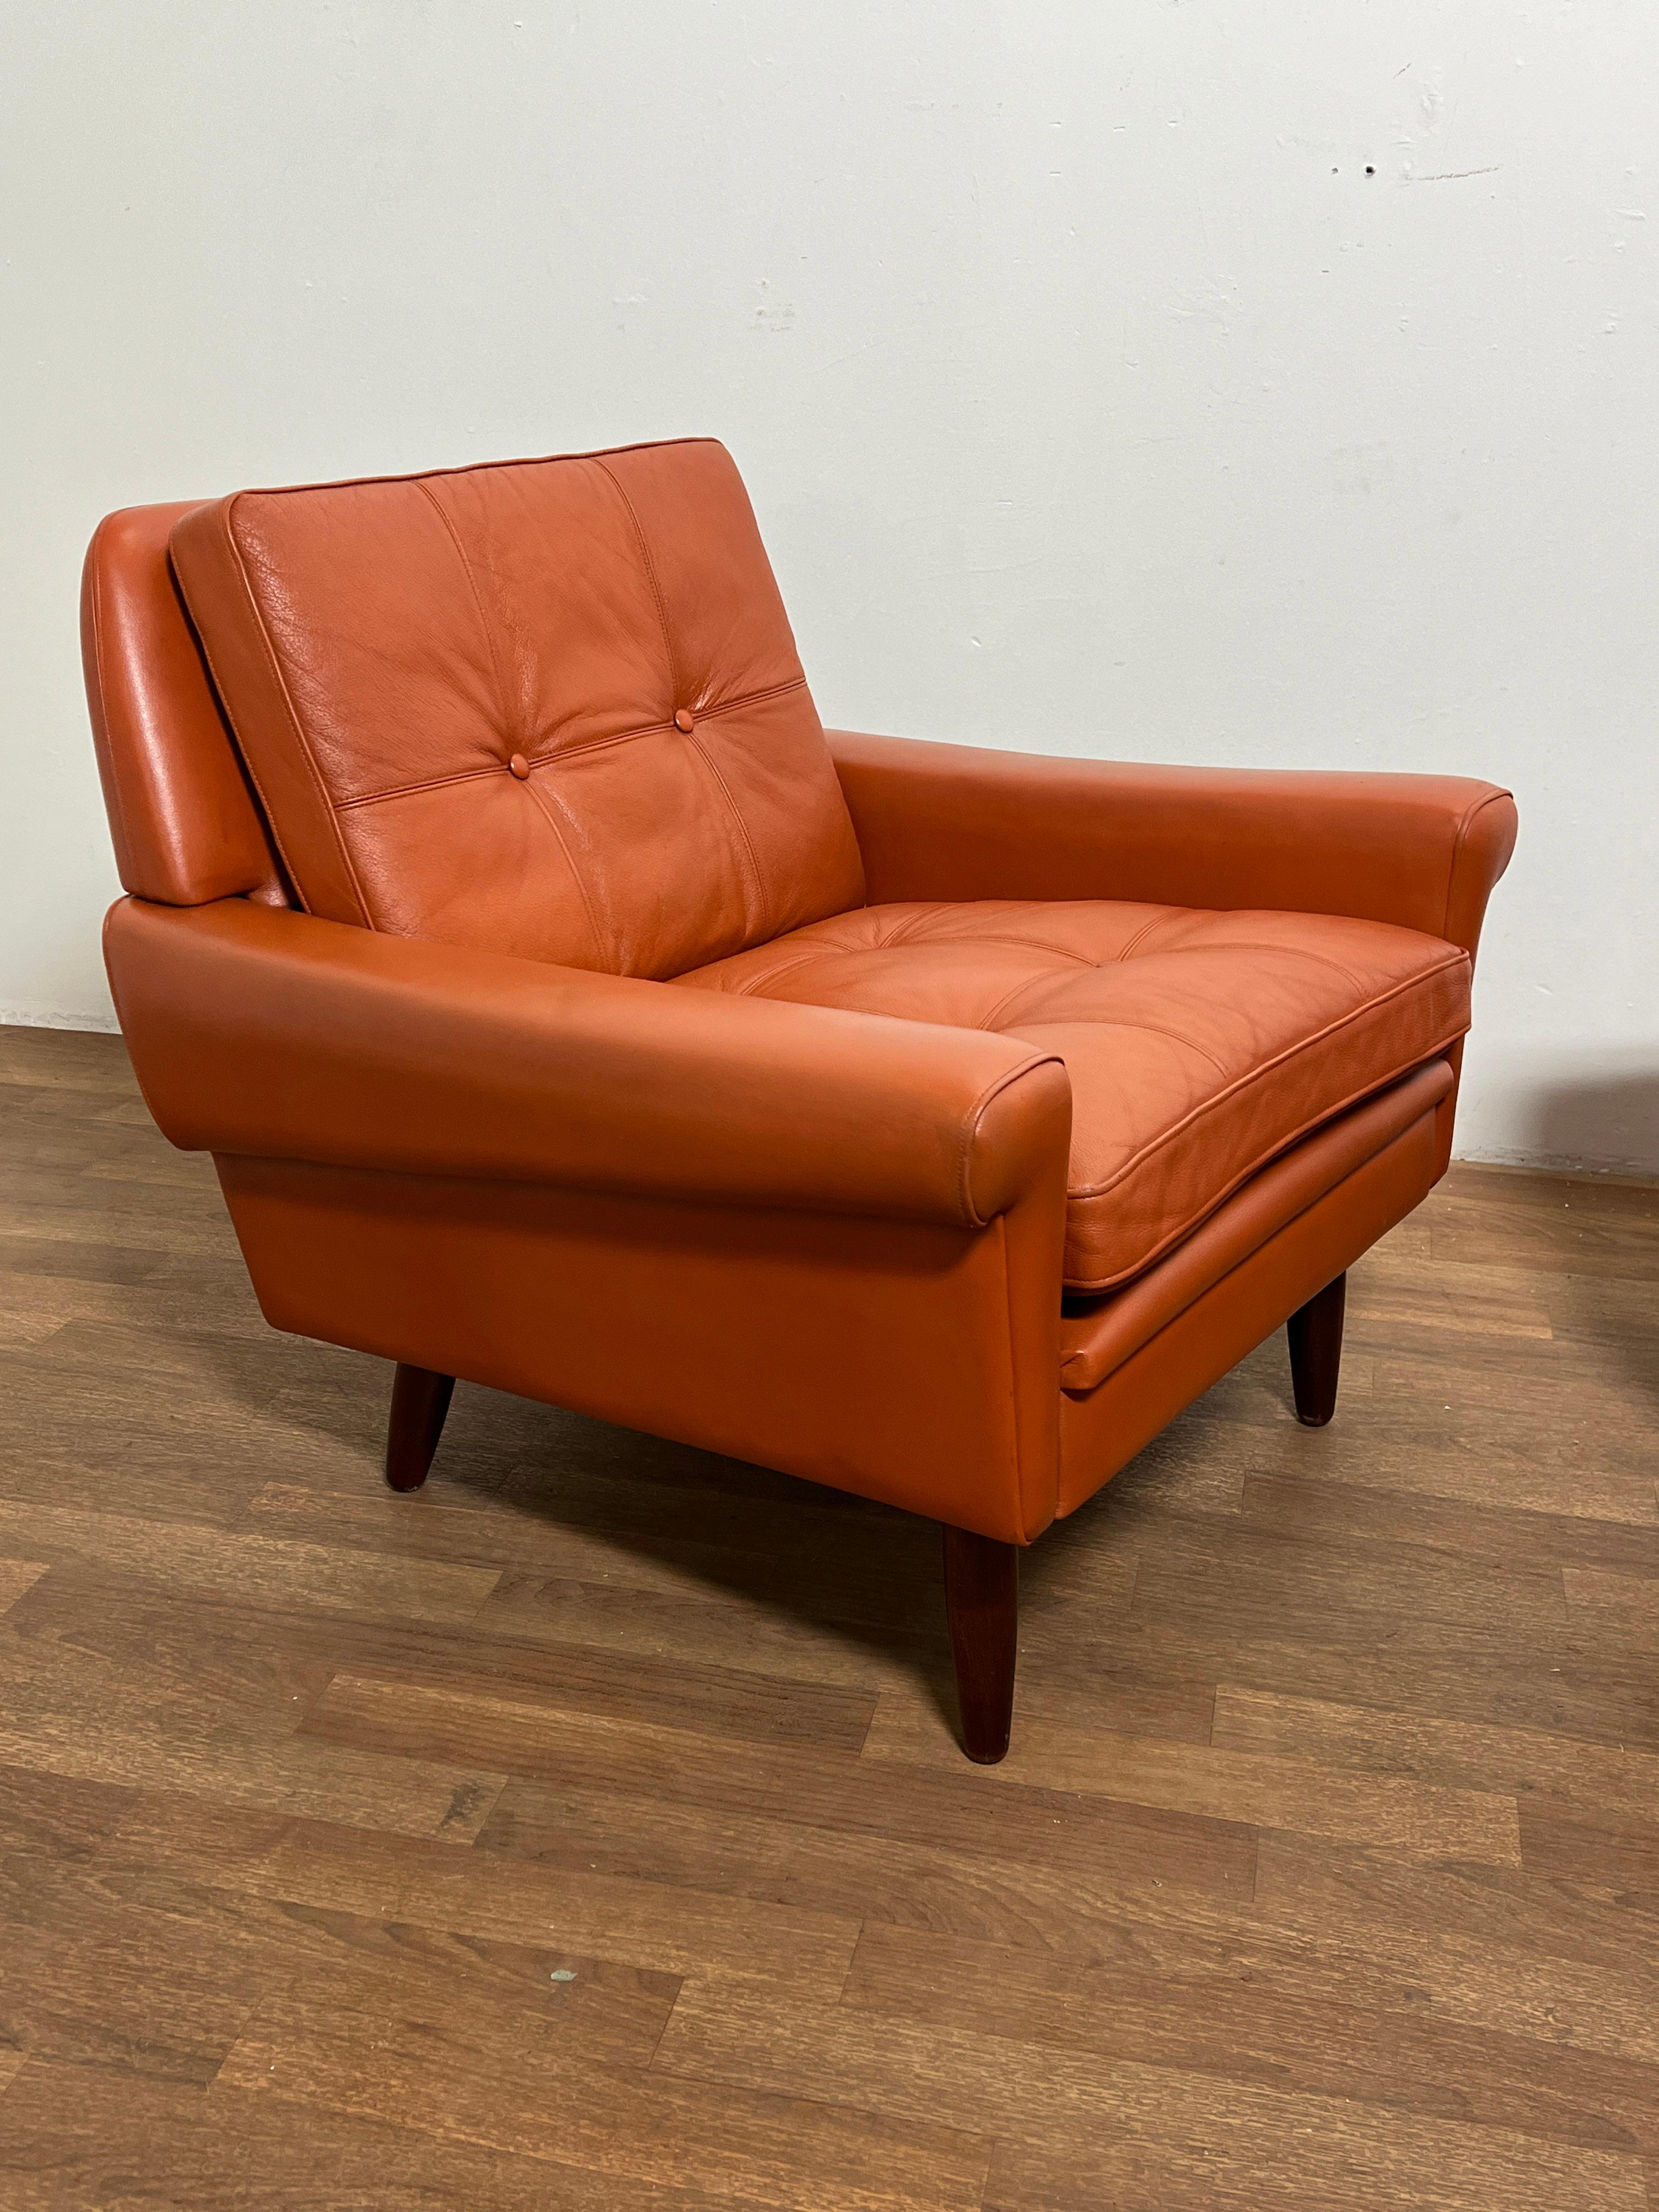 A pair of 1960s lounge chairs in original cognac leather by Svend Skipper Mobelfabrik, Denmark.